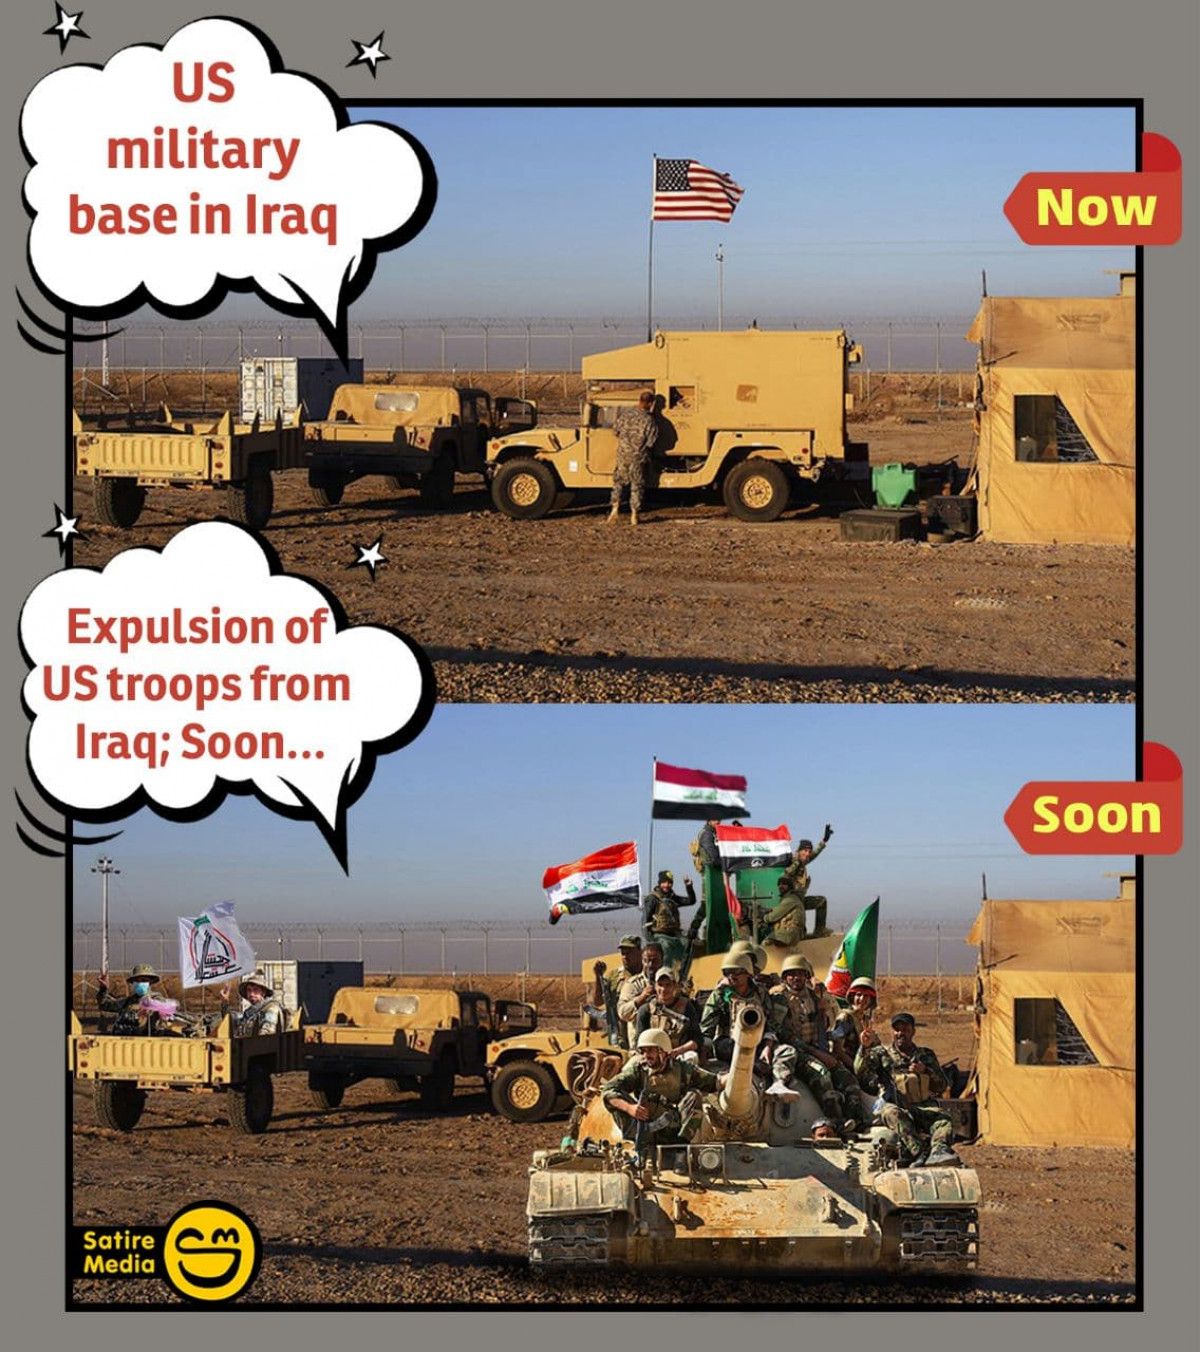 Expulsion of US troops from Iraq; Soon